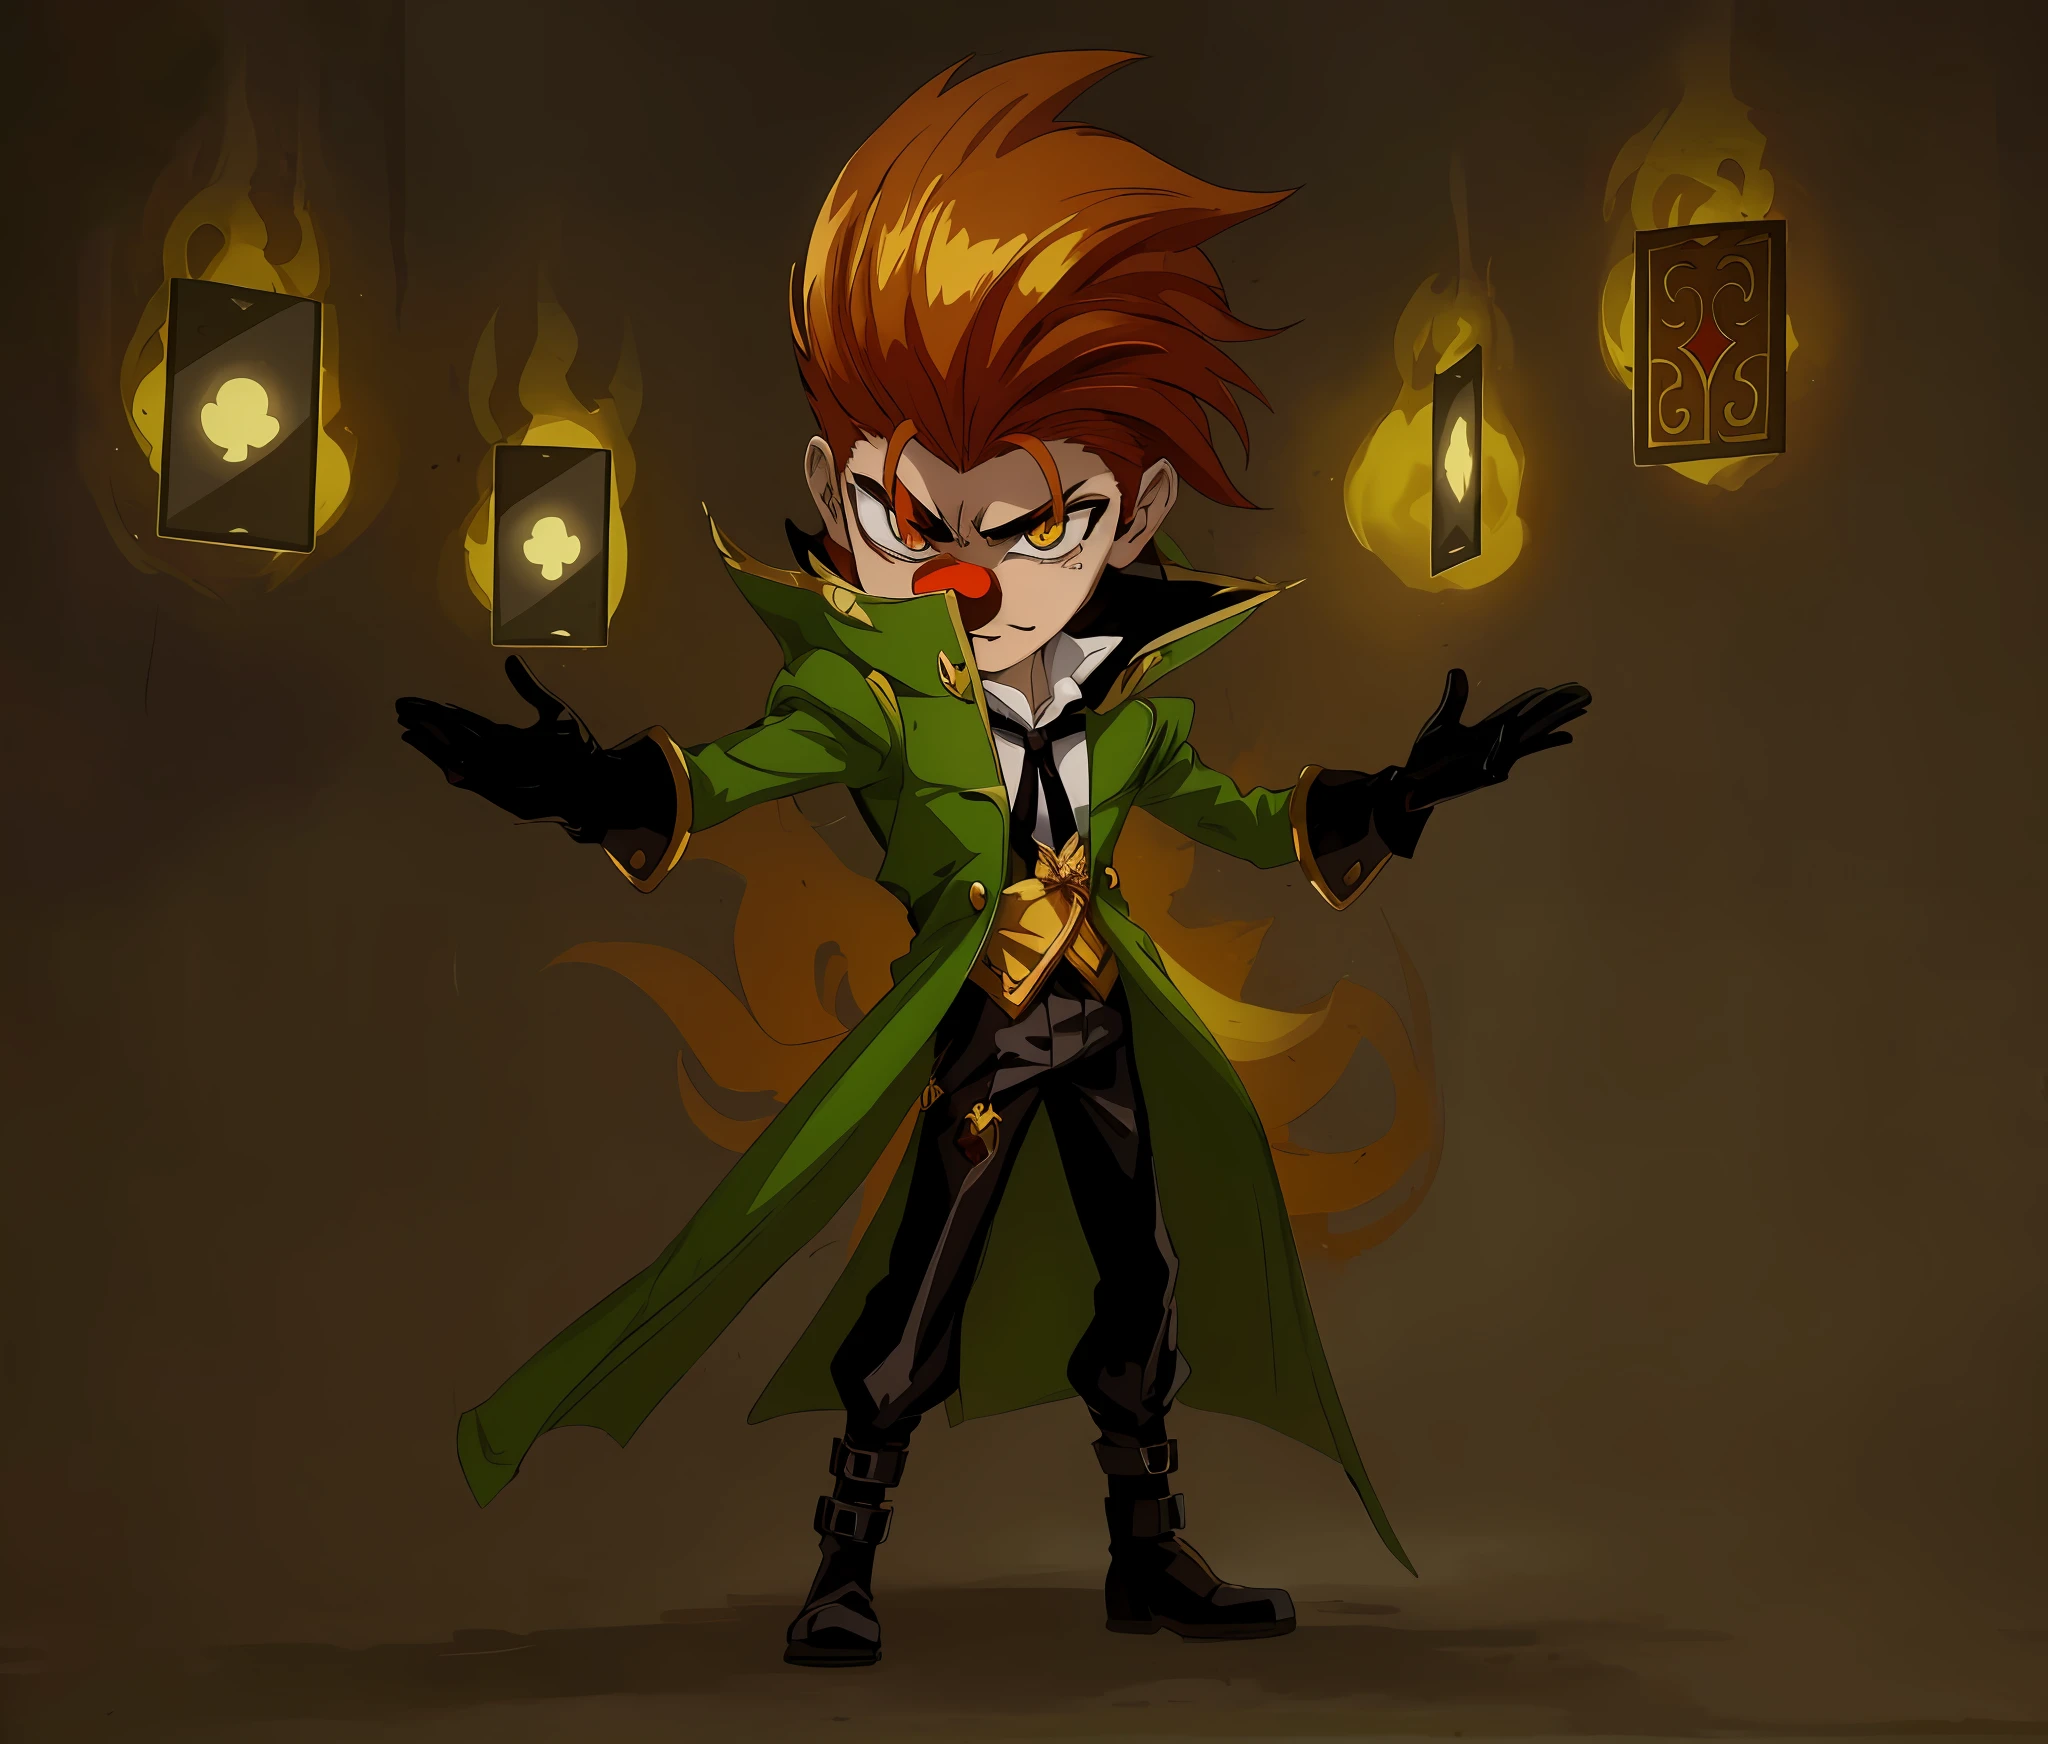 (Anime) . Close-up of a cartoon character with a green coat and red nose, Conception du personnage Demon Noble, Advanced Digital Chibi Art, Art des personnages de Maple Story, Evil male wizard, Chibi, Lancer un sort de feu, Dapper Dream Demon, Pose of the villain, inspired by Luigi Kasimir, Partie Brando, Style League of Legends, evil wizard, cast an evil spell . (Masterpiece: 1.8), k quality, final fantasy artwork concept, detailed manga eyes, detailed hair, detailed clothes, detailed body, sharper drawings, pronounced detailed face, shiny objects like jewelry, see the creases on the clothes, more rounded eyes, globular transparent liquid eyes, more colors, more consistent clothes , correct clothing features, better eye line, better shoulders, really colorful, coarser line, black line, finishing. (drowing (anime (manga (comics)))) (coarser stroke: 1.8) (black stroke: 1.8) (color: 1.8) (clean: 1.8) (color contrast: 1.8) (black outline: 1.8) (adjusted color contrast: 1.8) (shadow play: 1.8) (manga eyes: 1.8) (muscle: 1.5 ) (rendering homogeneous: 1.3)